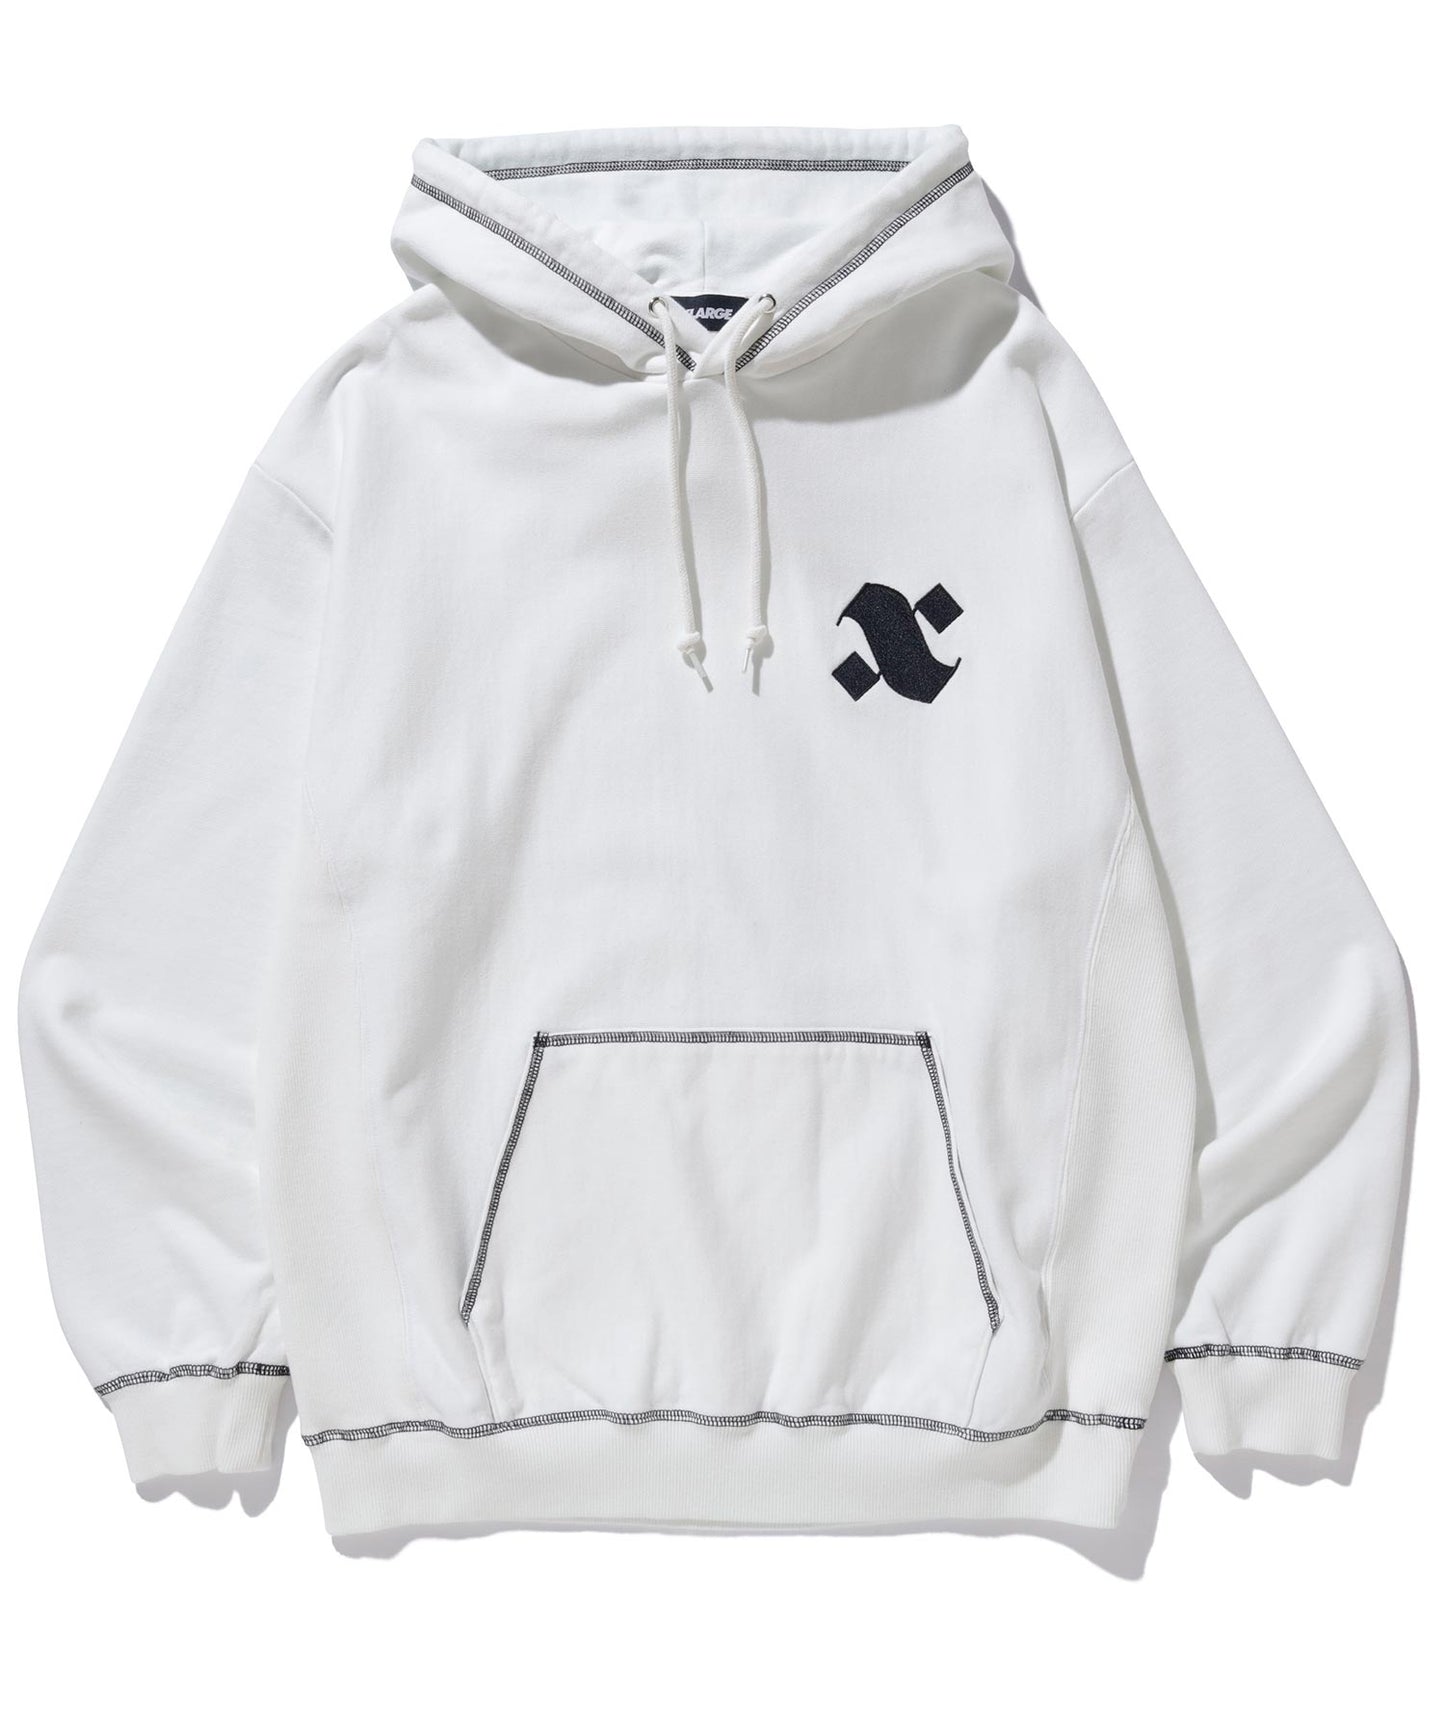 CONTRAST STITCH PULLOVER HOODED SWEAT